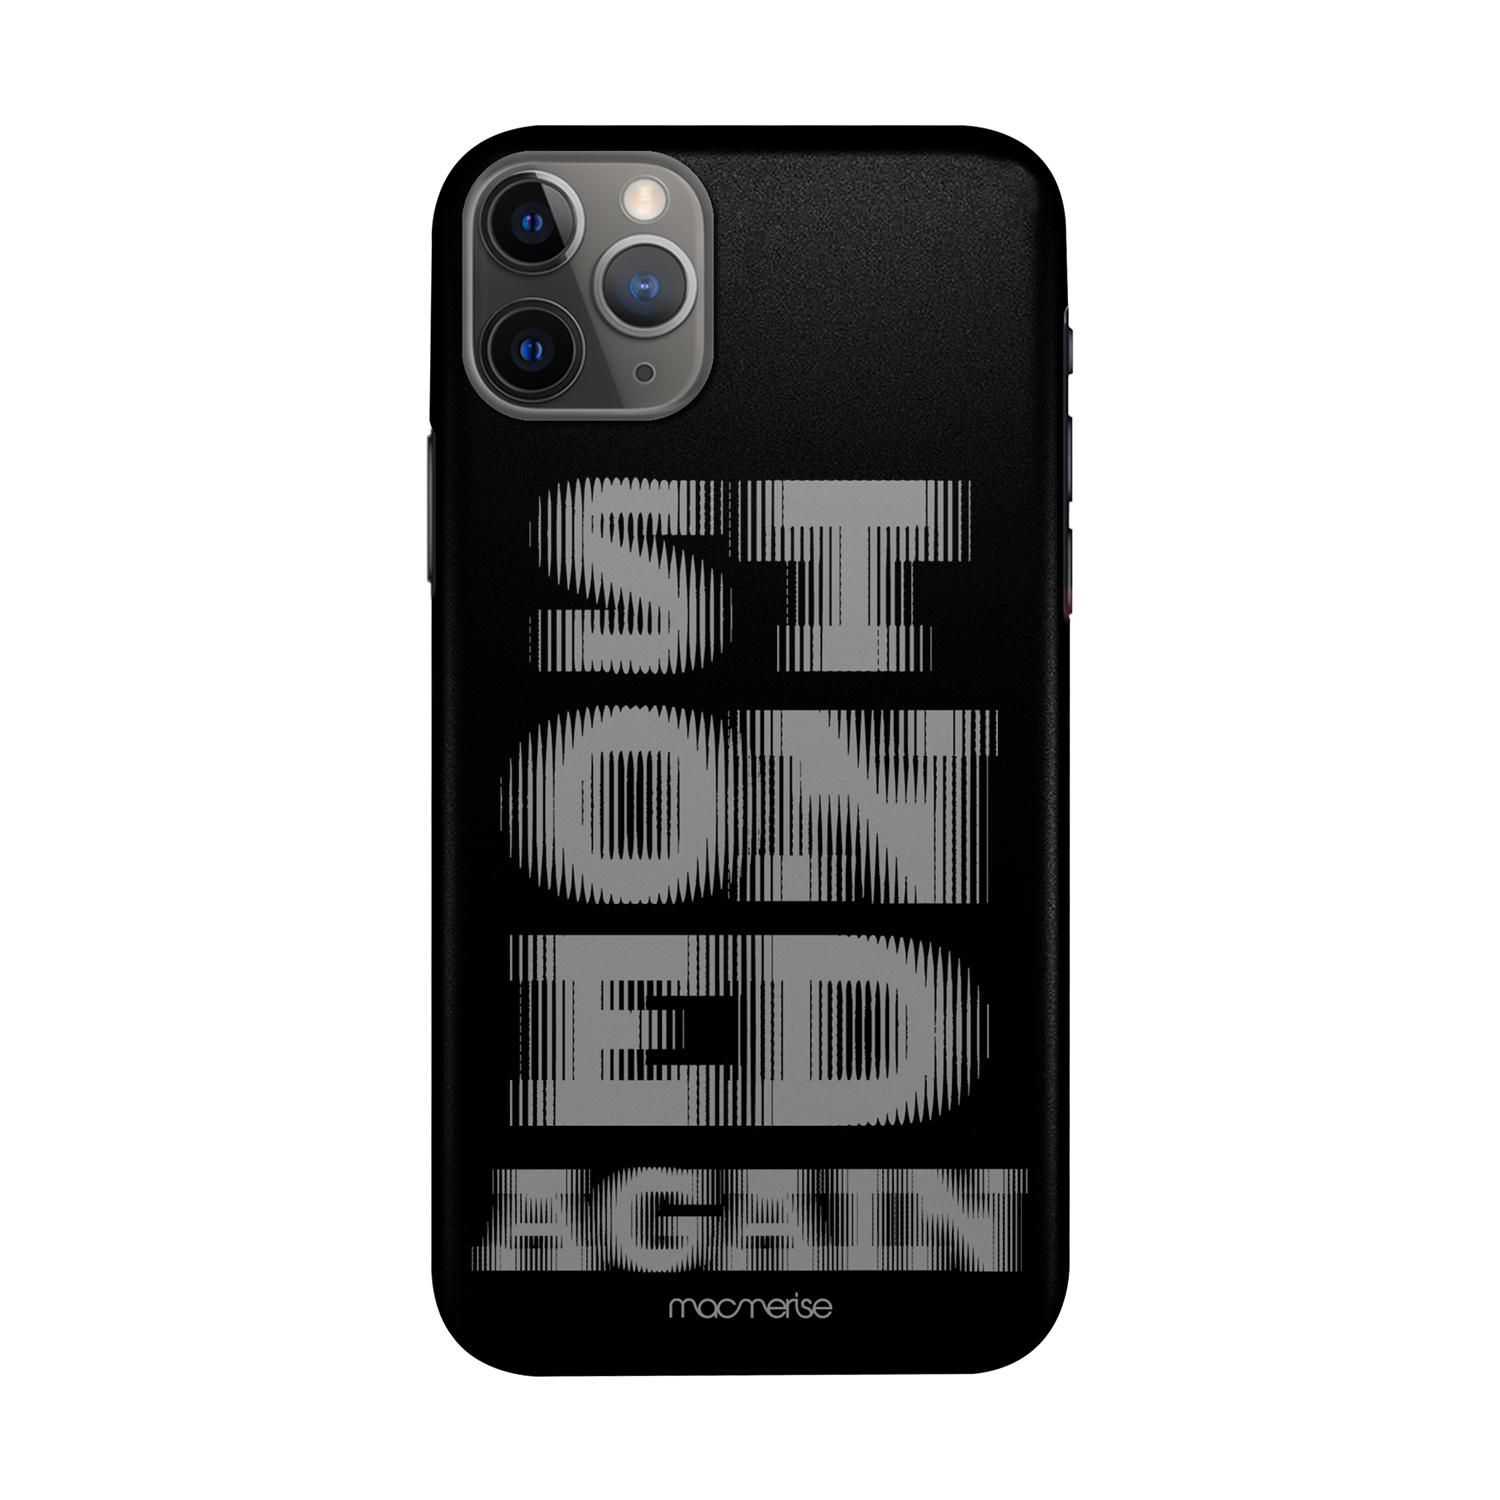 Buy Stoned Again - Sleek Phone Case for iPhone 11 Pro Online